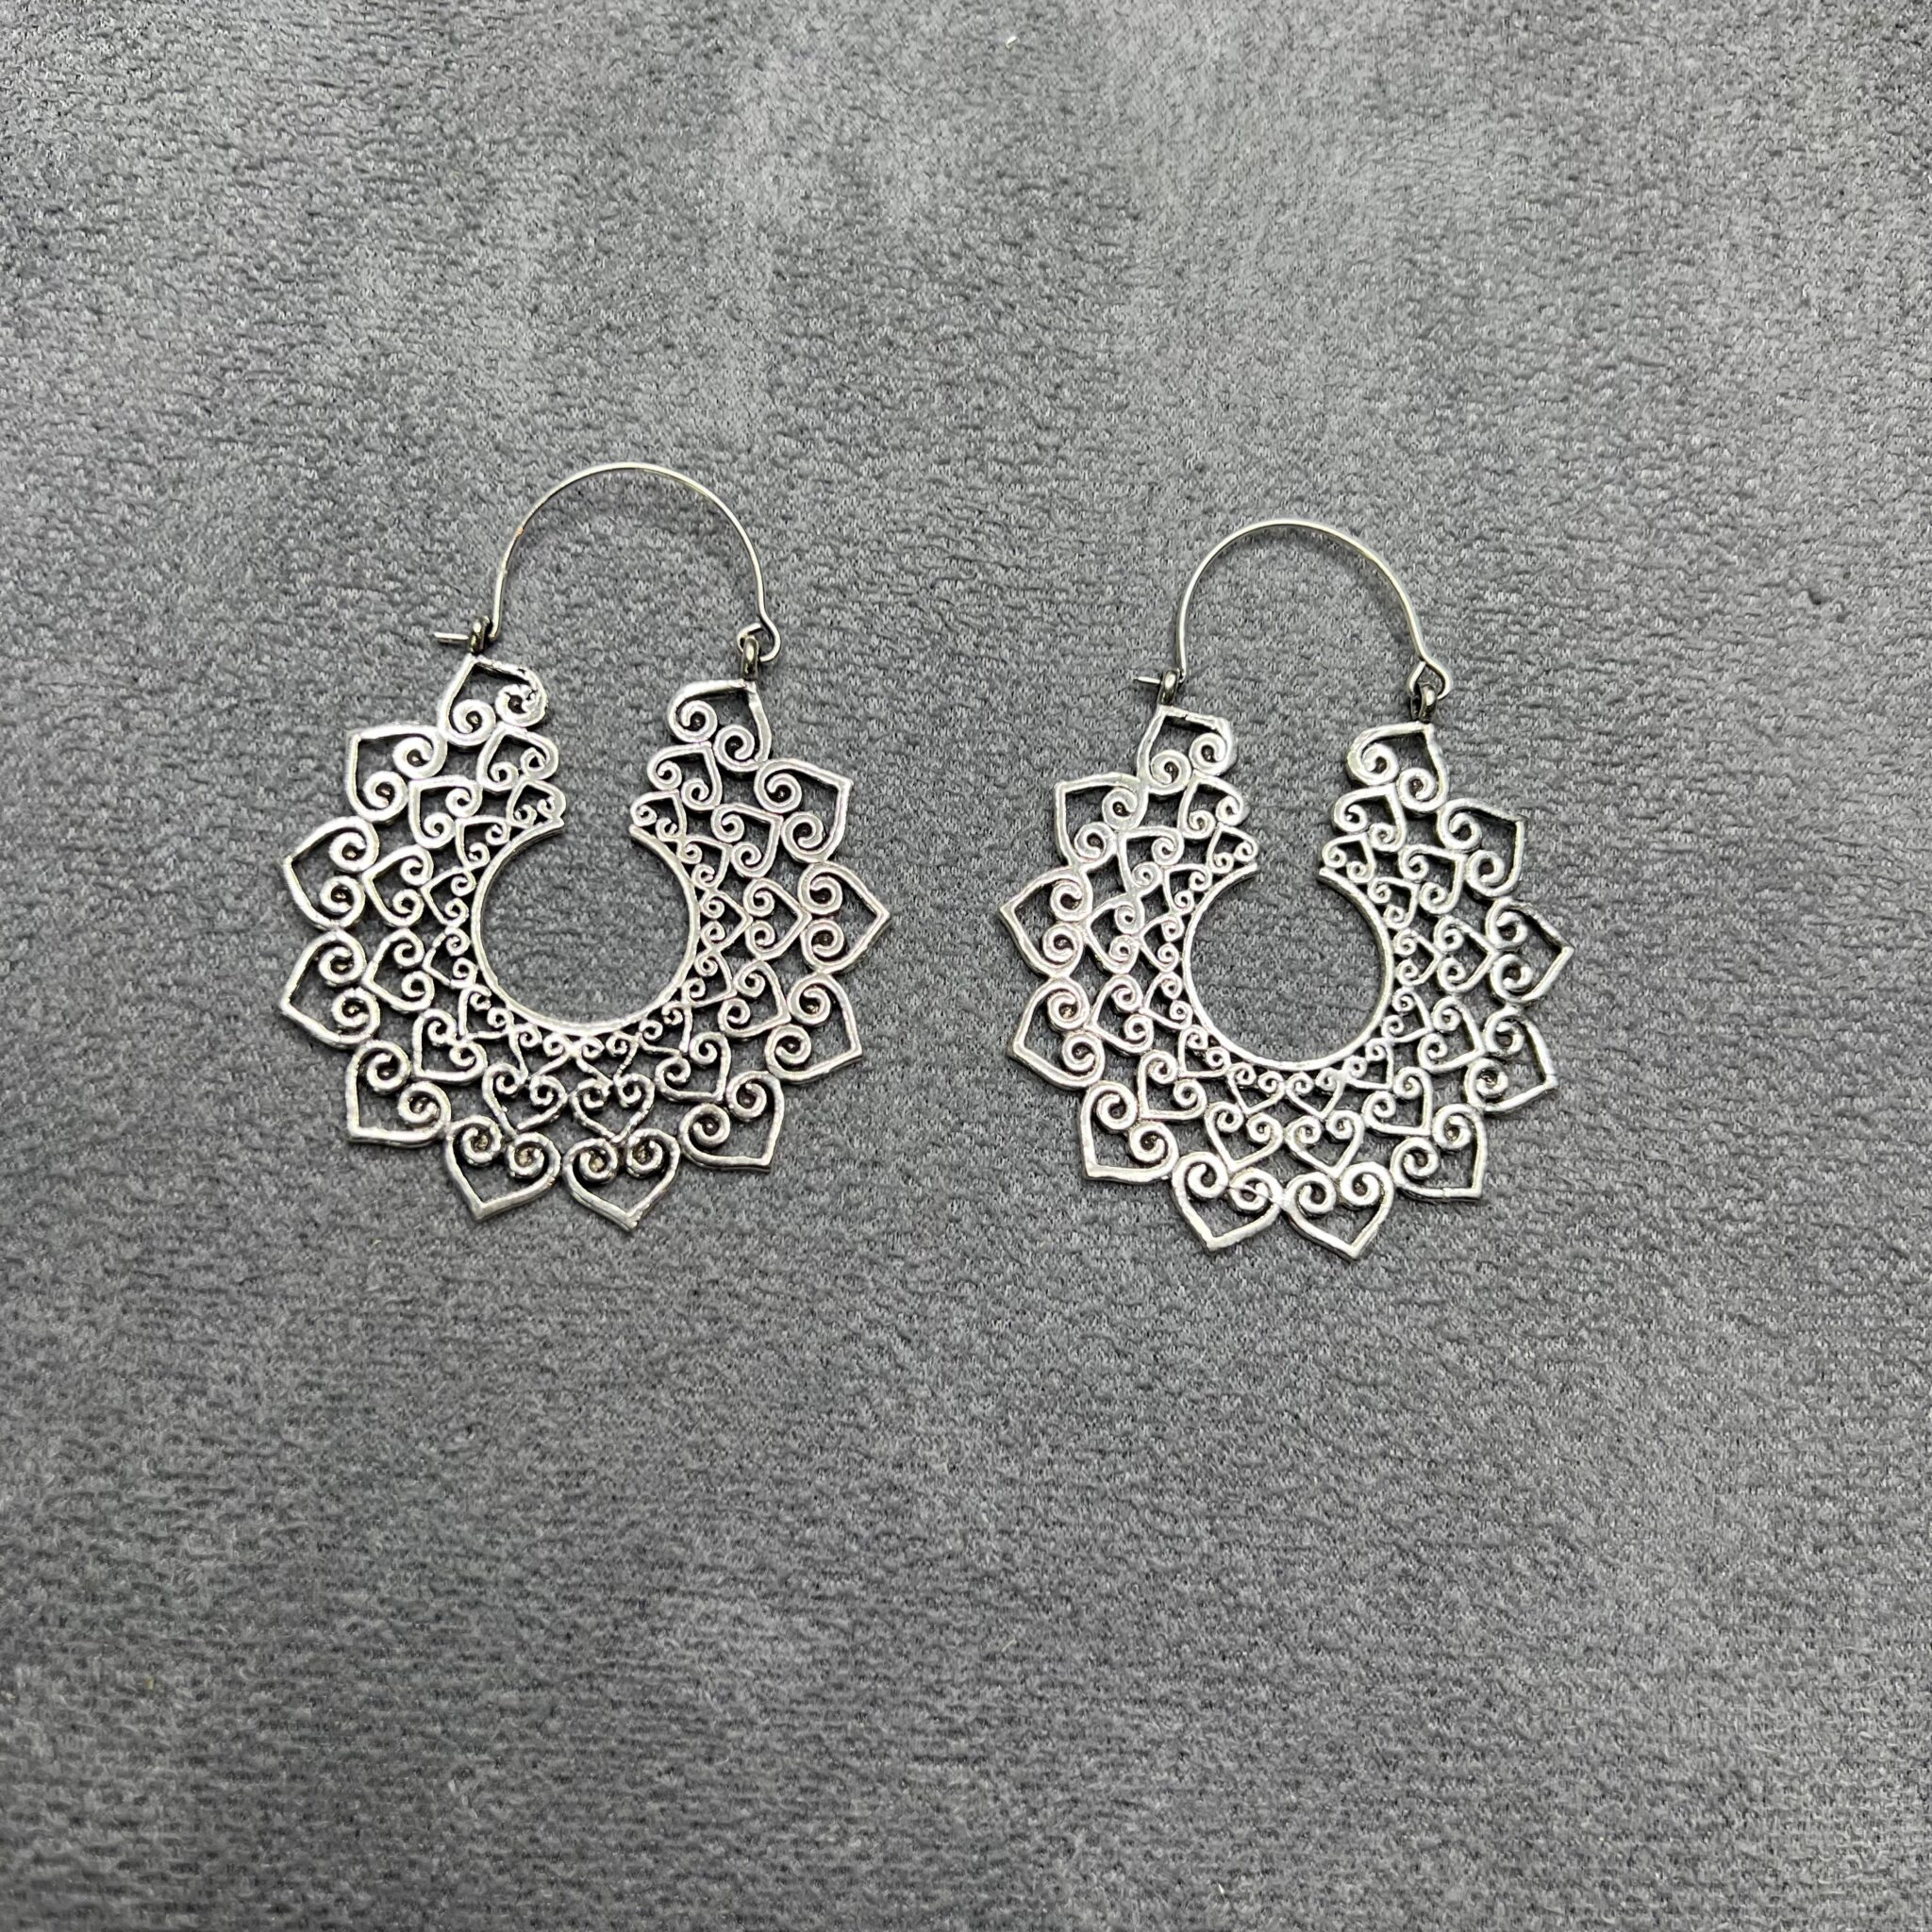 Silver Plated Spike Hoop Earrings - All About Eve at Home